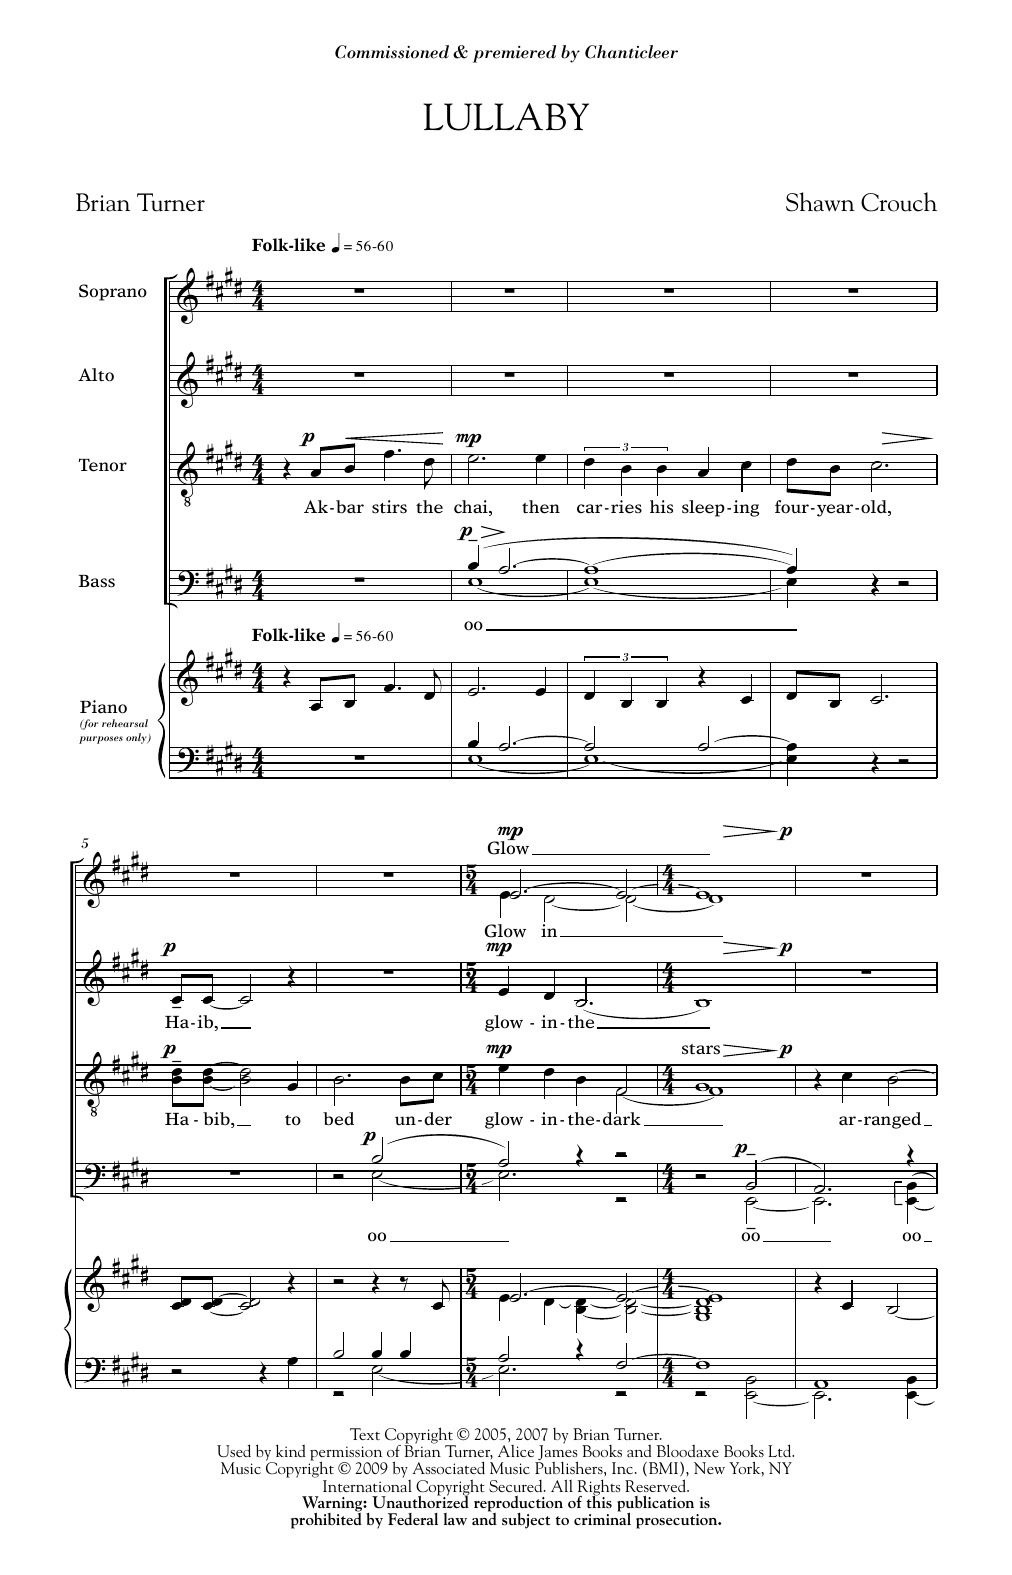 Download Shawn Crouch Lullaby Sheet Music